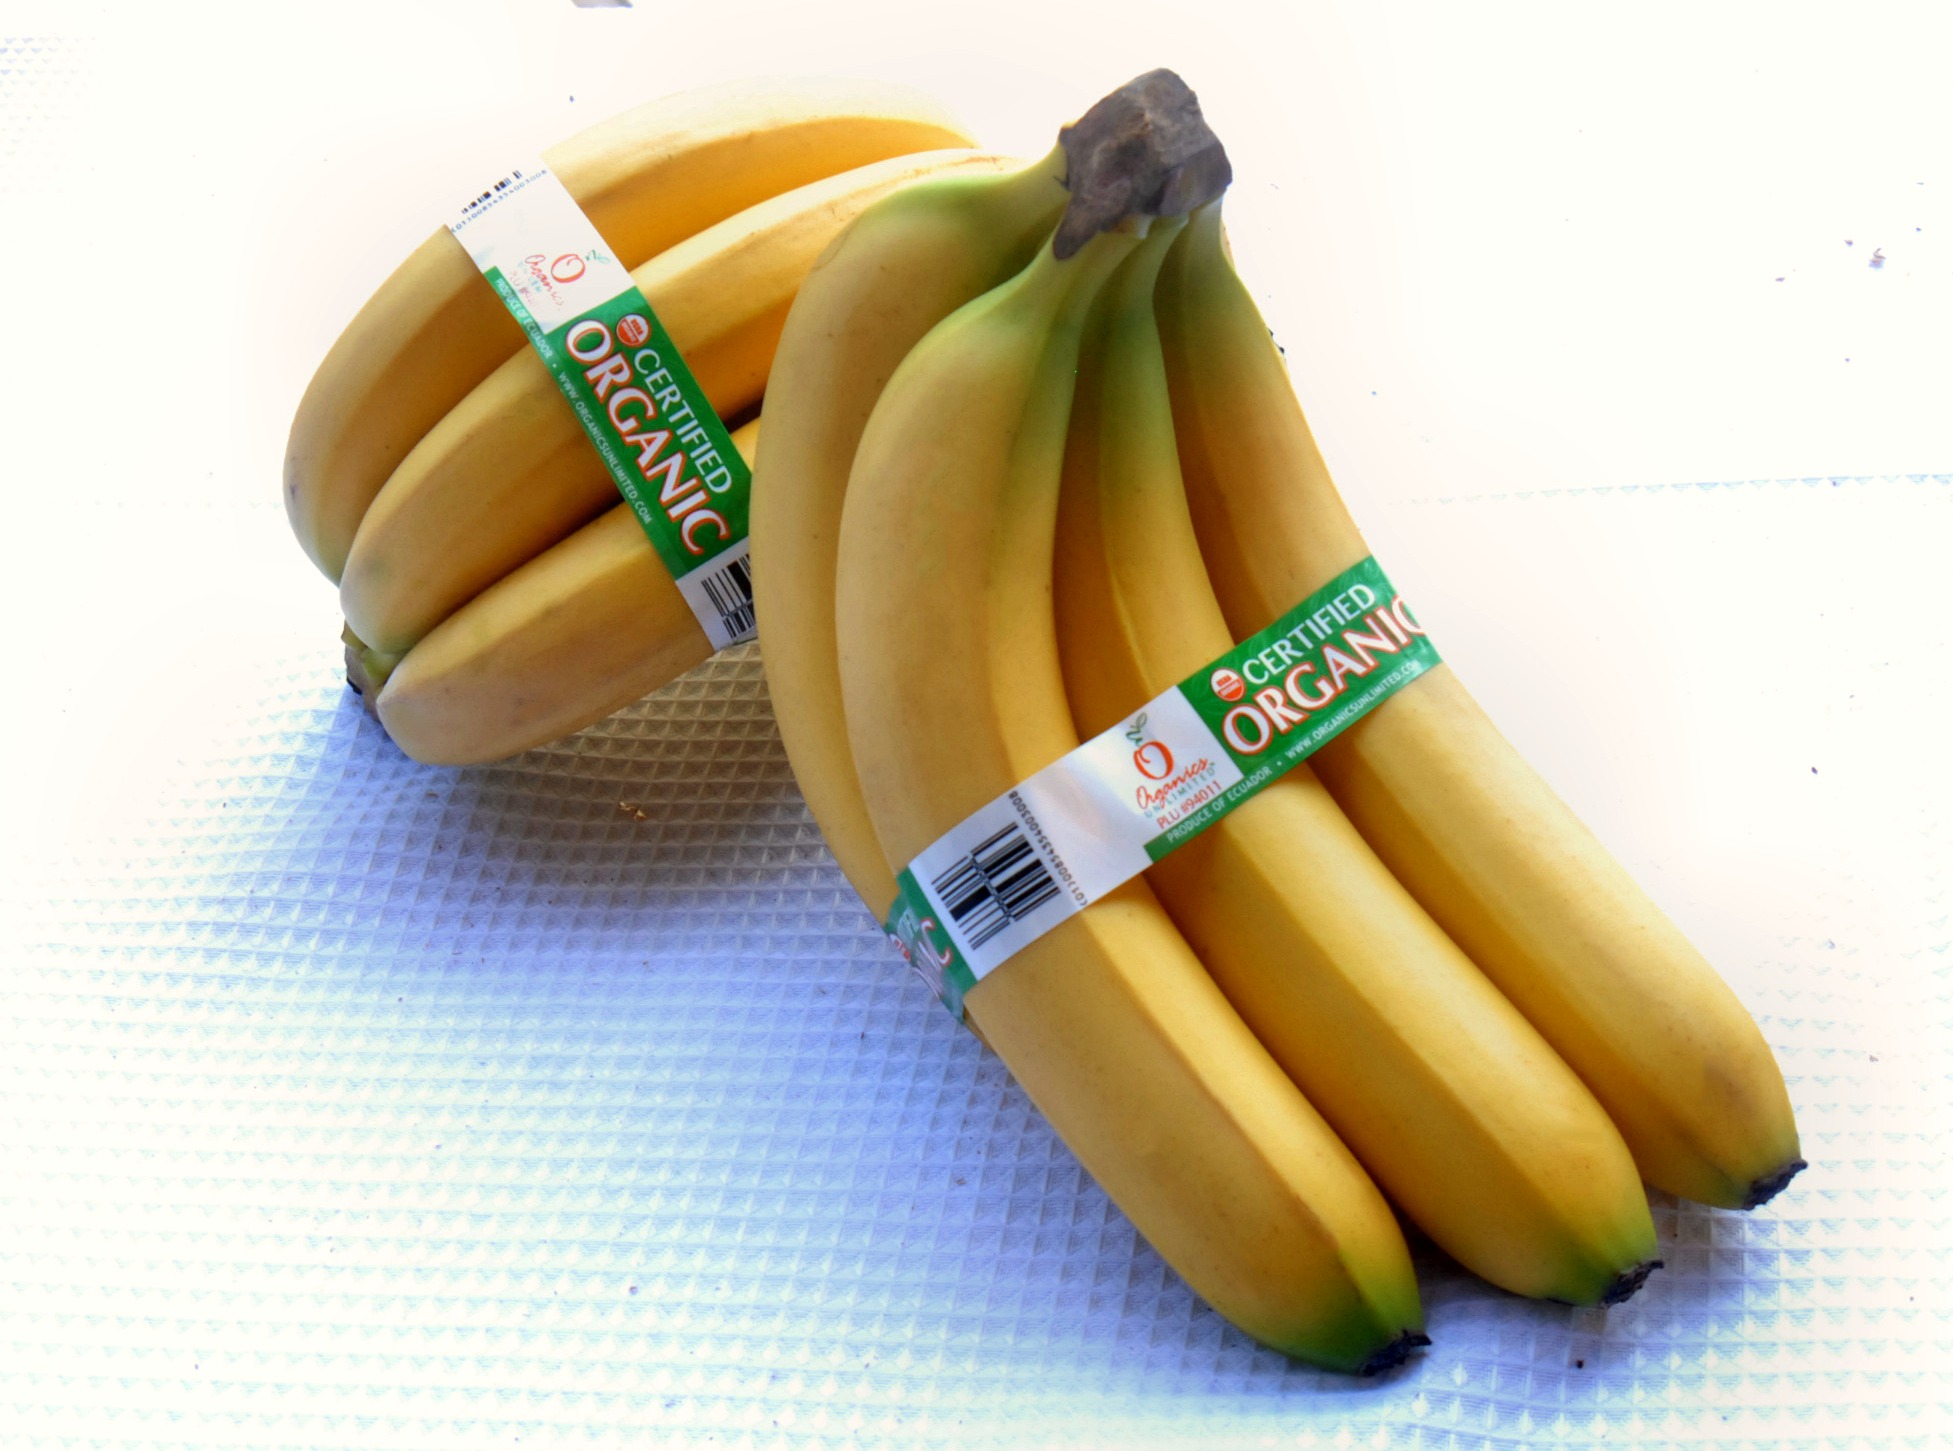 Banana bunches from Organics Unlimited